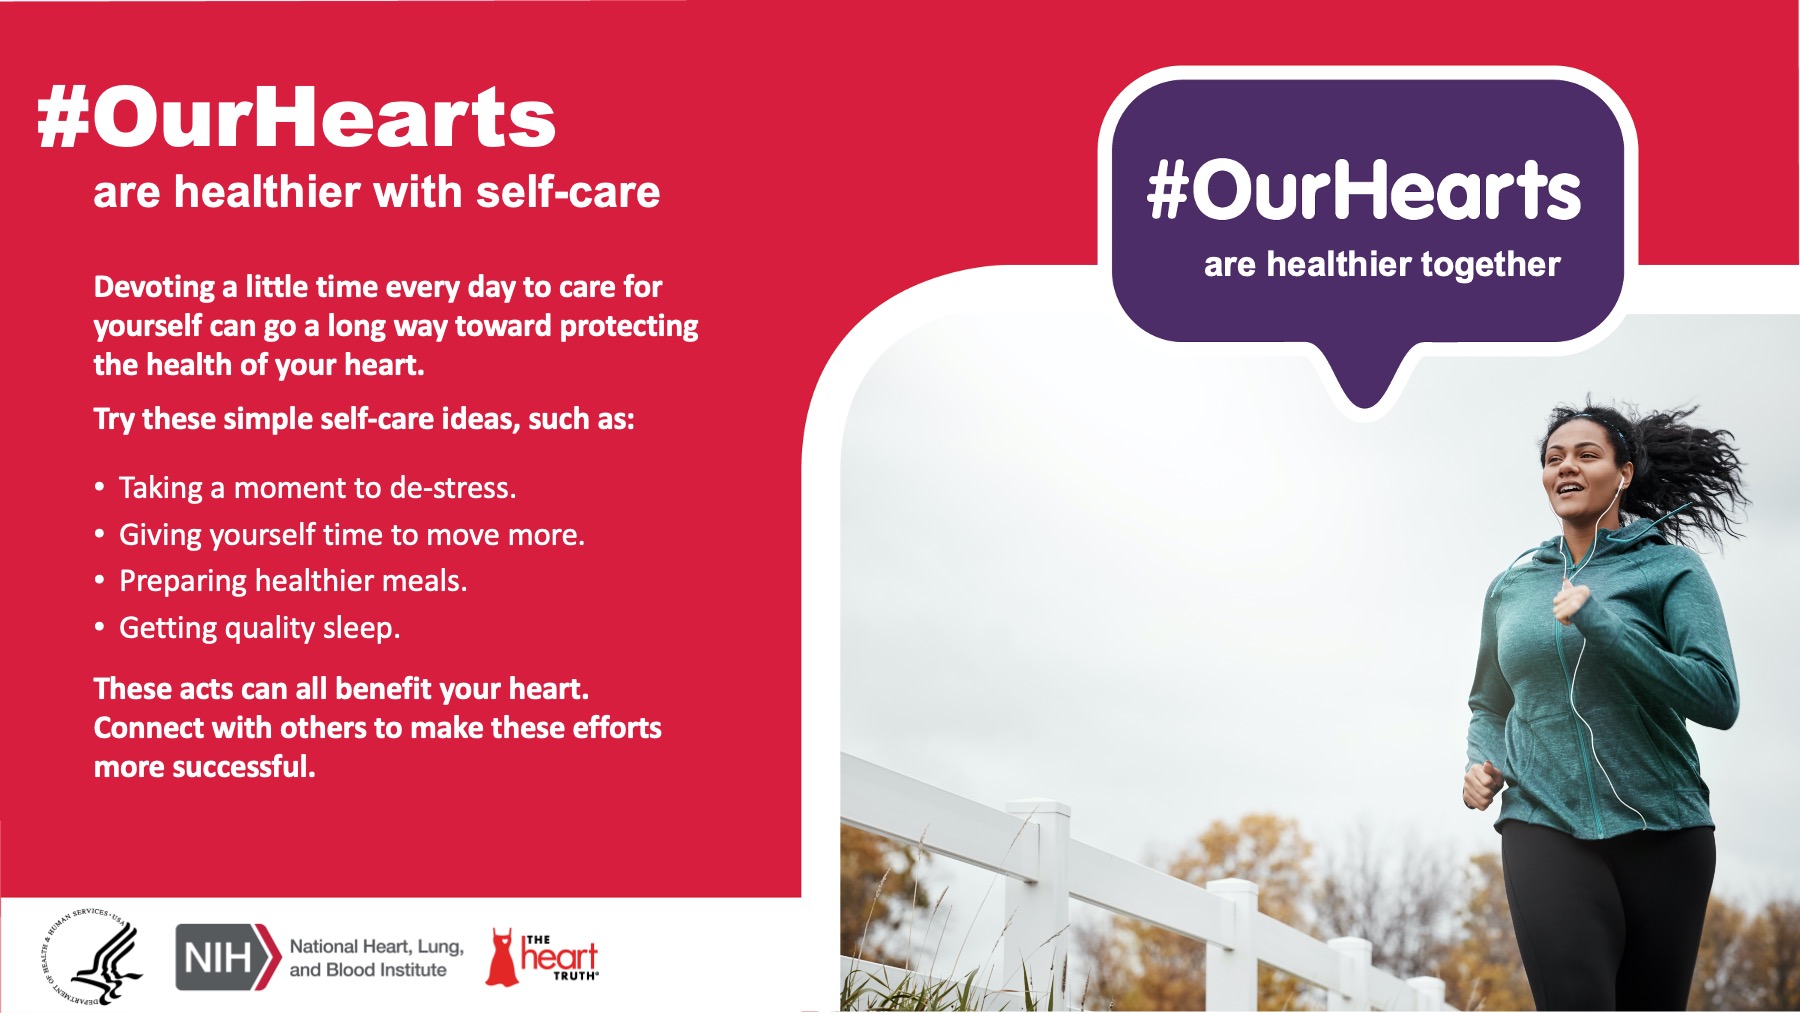 #OurHearts are healthier to